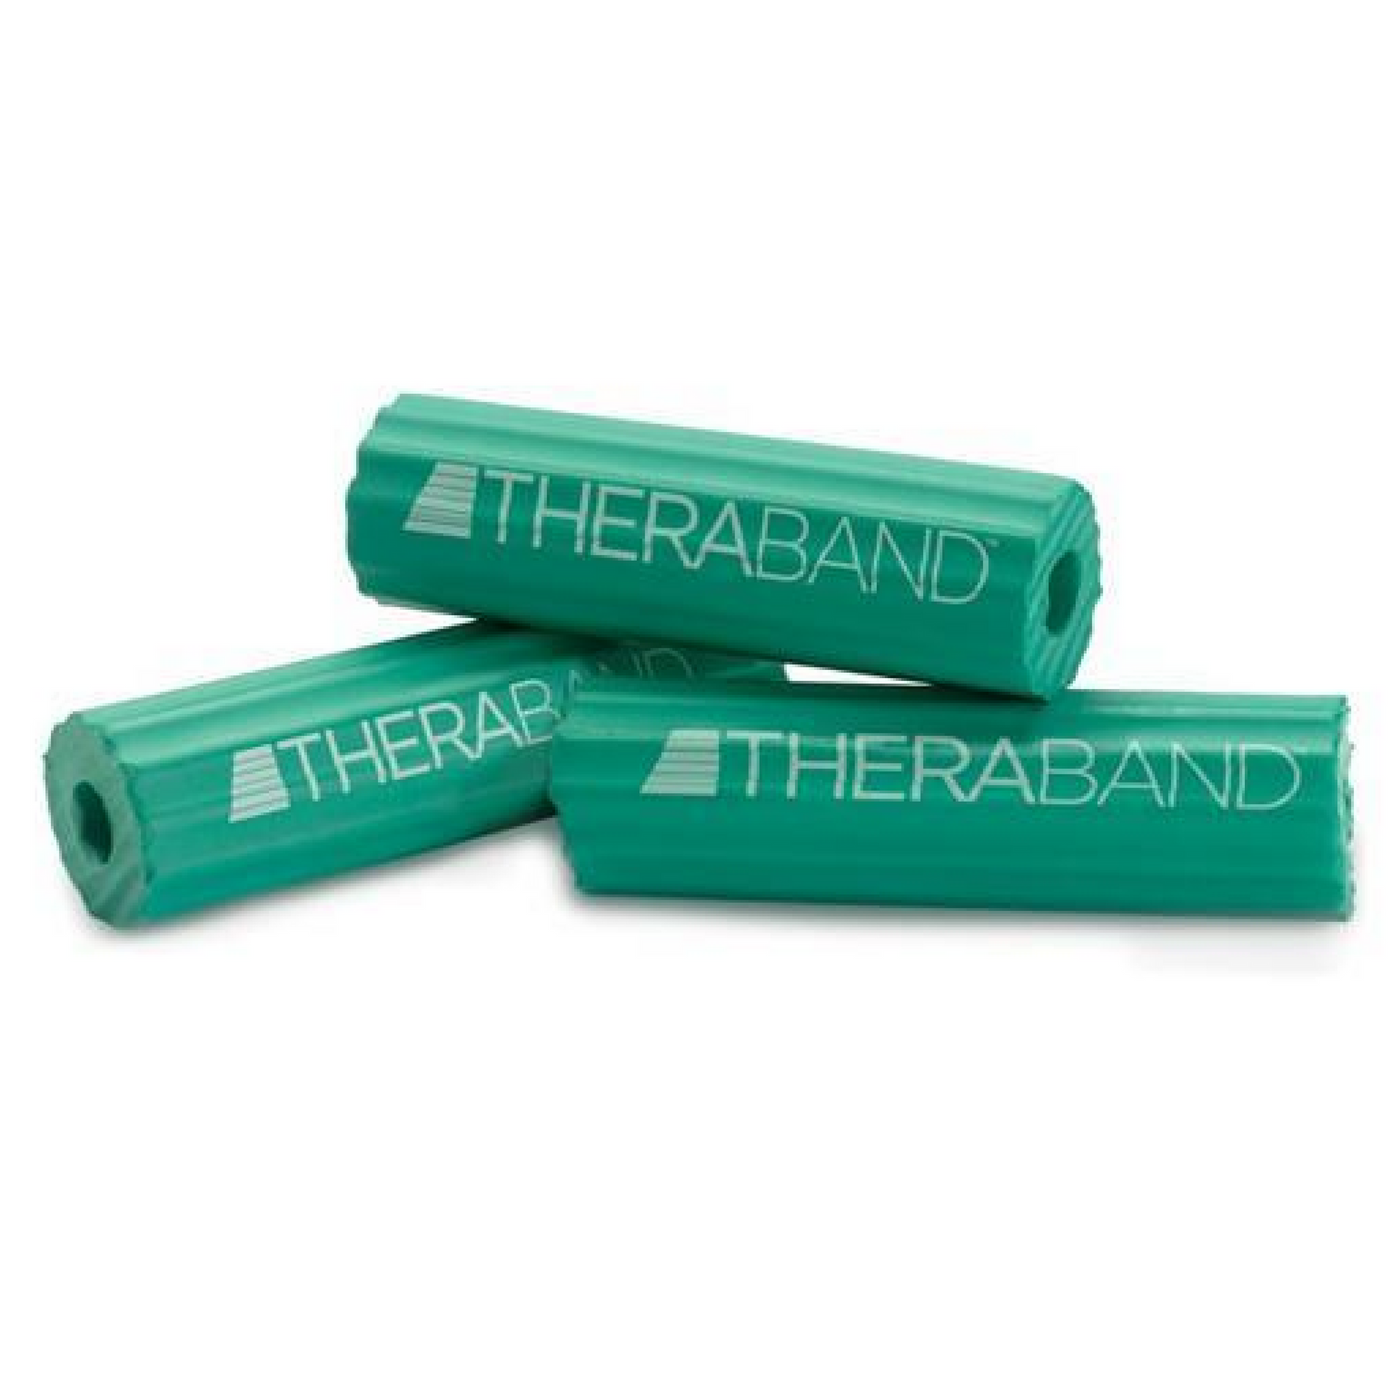 Theraband Foot Rollers unpackaged